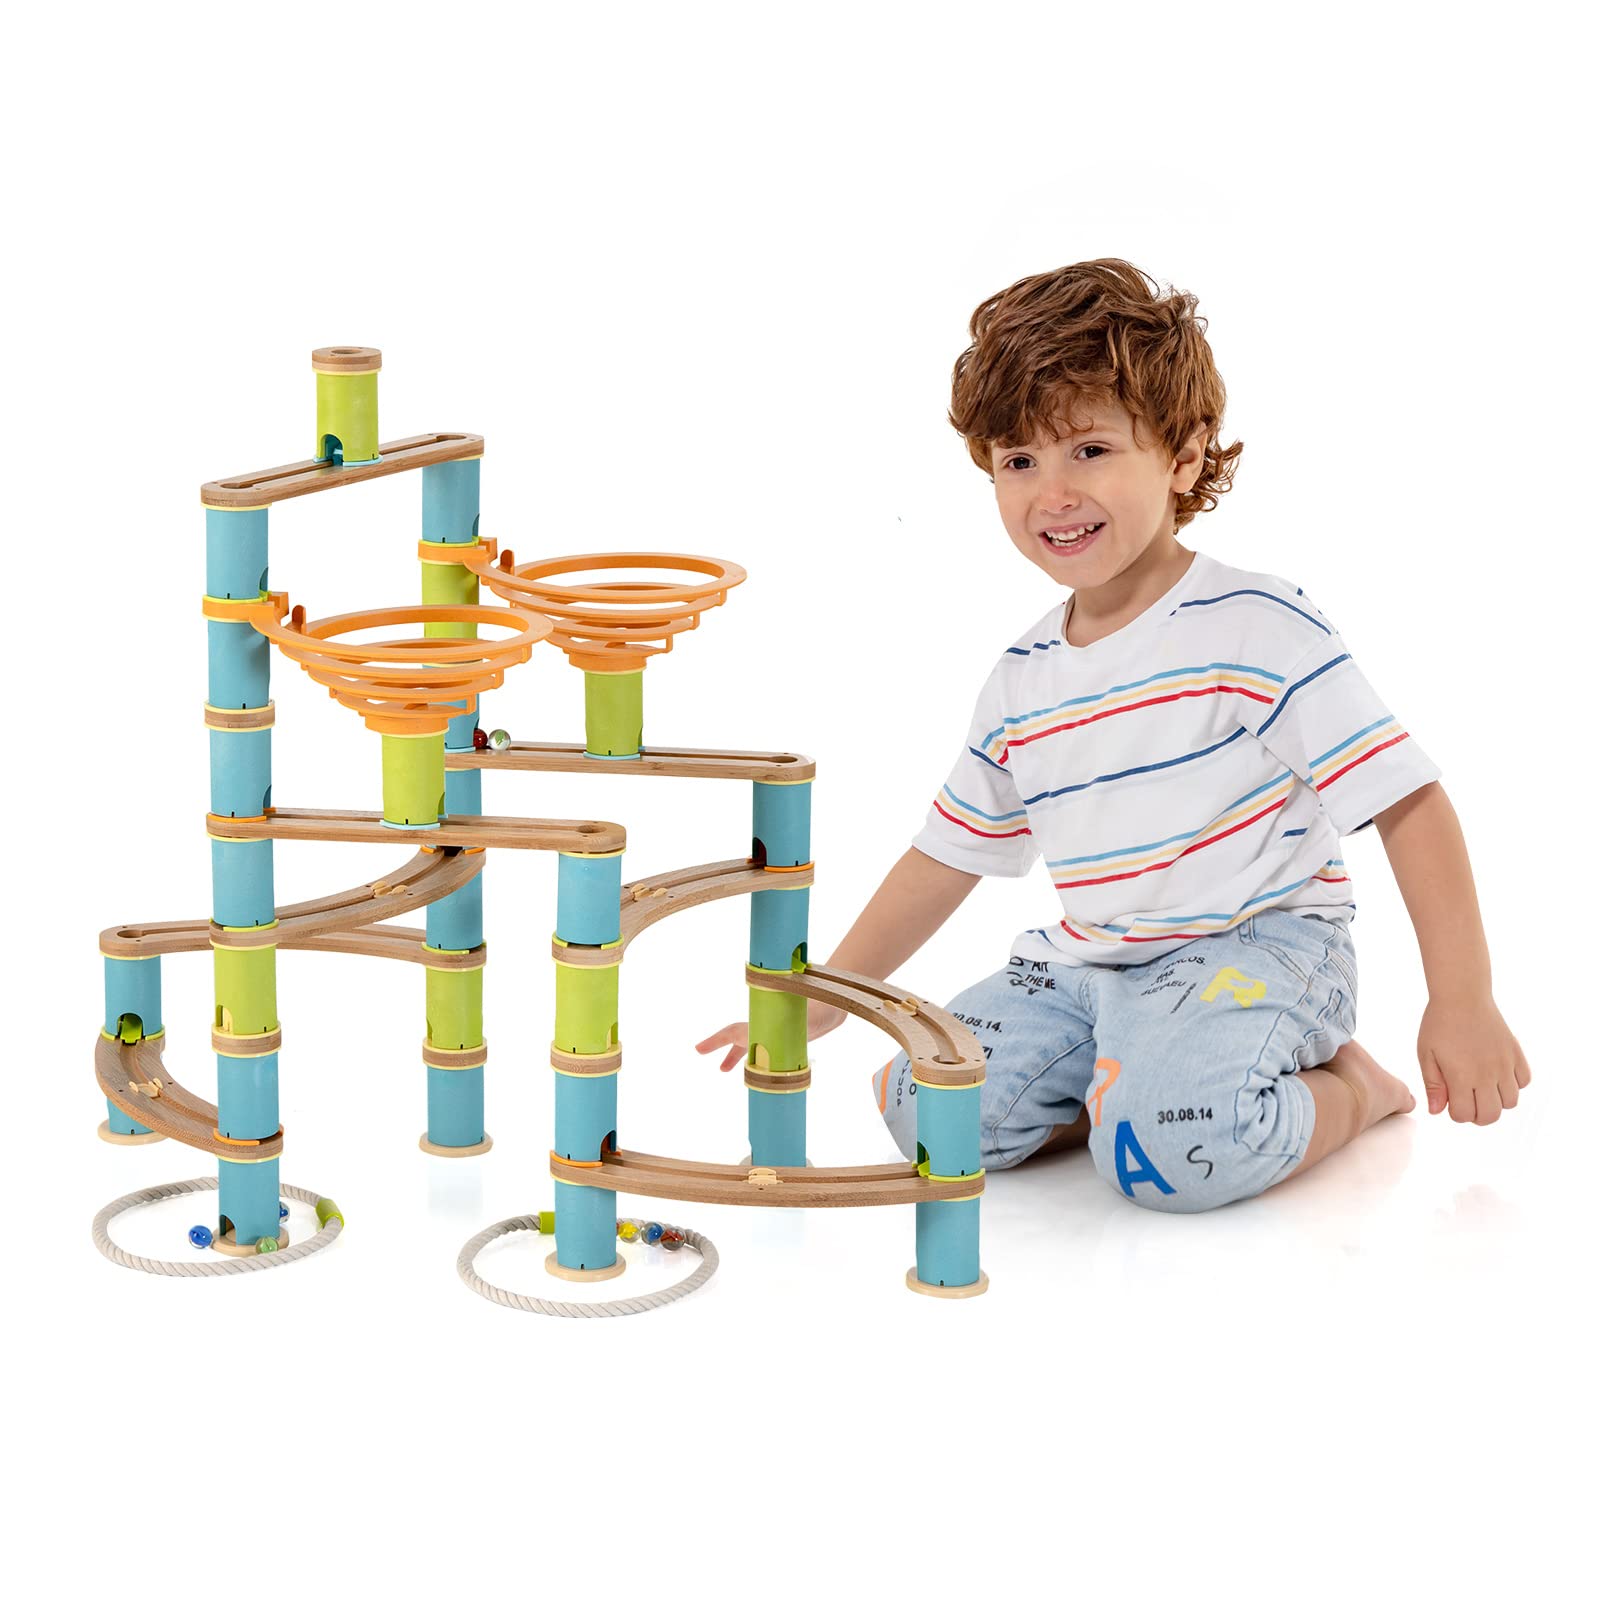 Costzon Kids Marble Run Building Toys 163 PCS Bamboo Educational Construction Maze Block Toy Set with Glass Marbles STEM Le